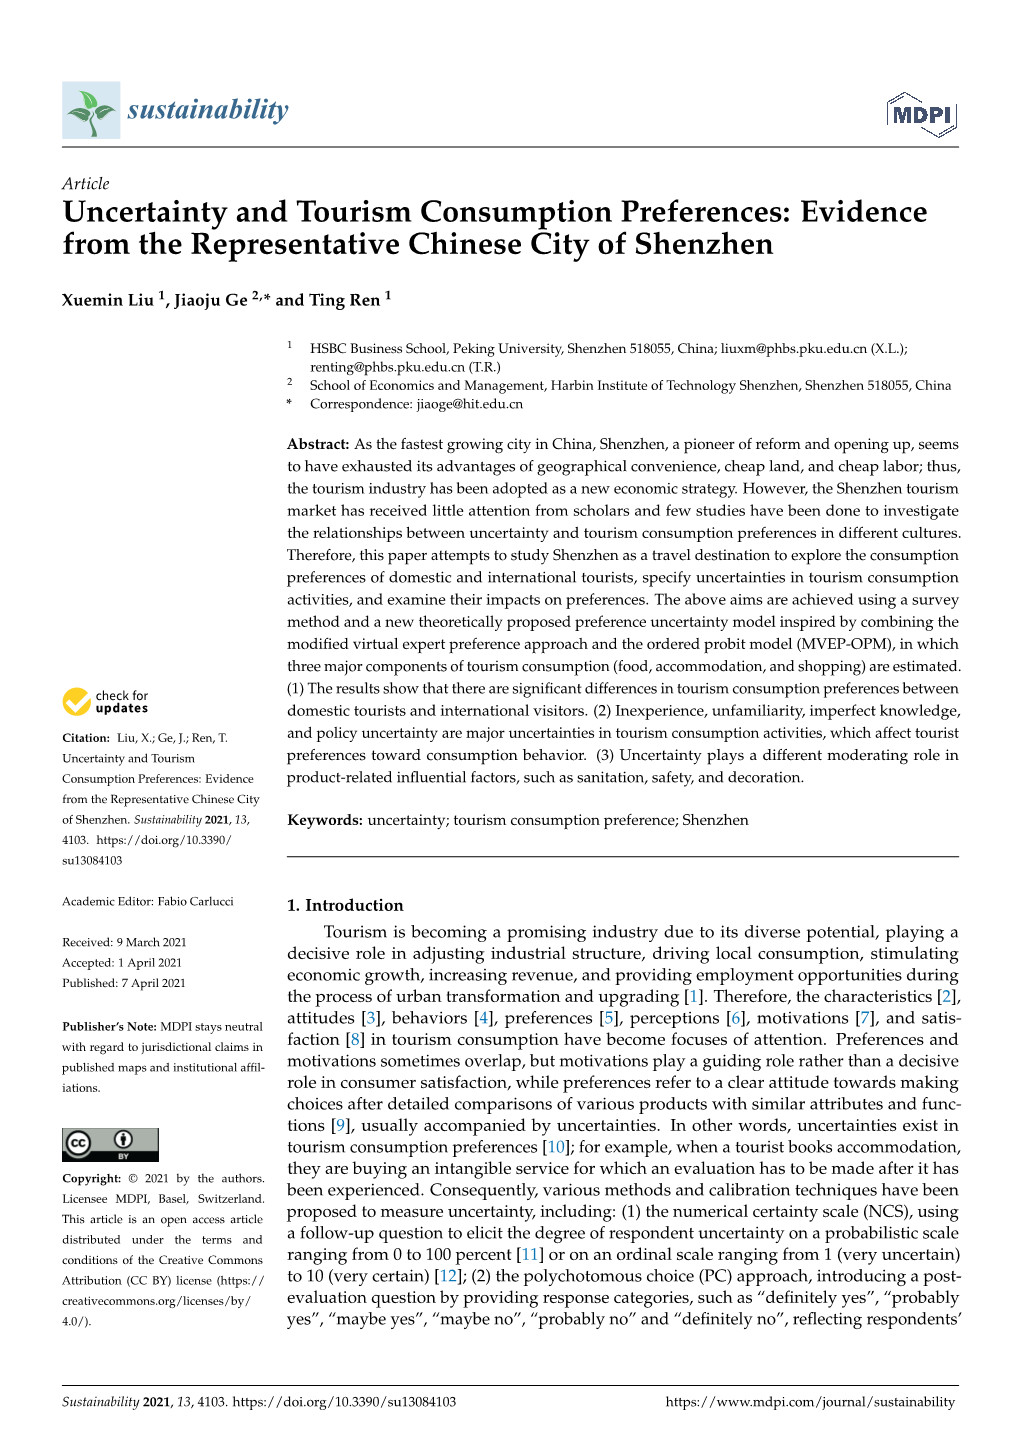 Uncertainty and Tourism Consumption Preferences: Evidence from the Representative Chinese City of Shenzhen